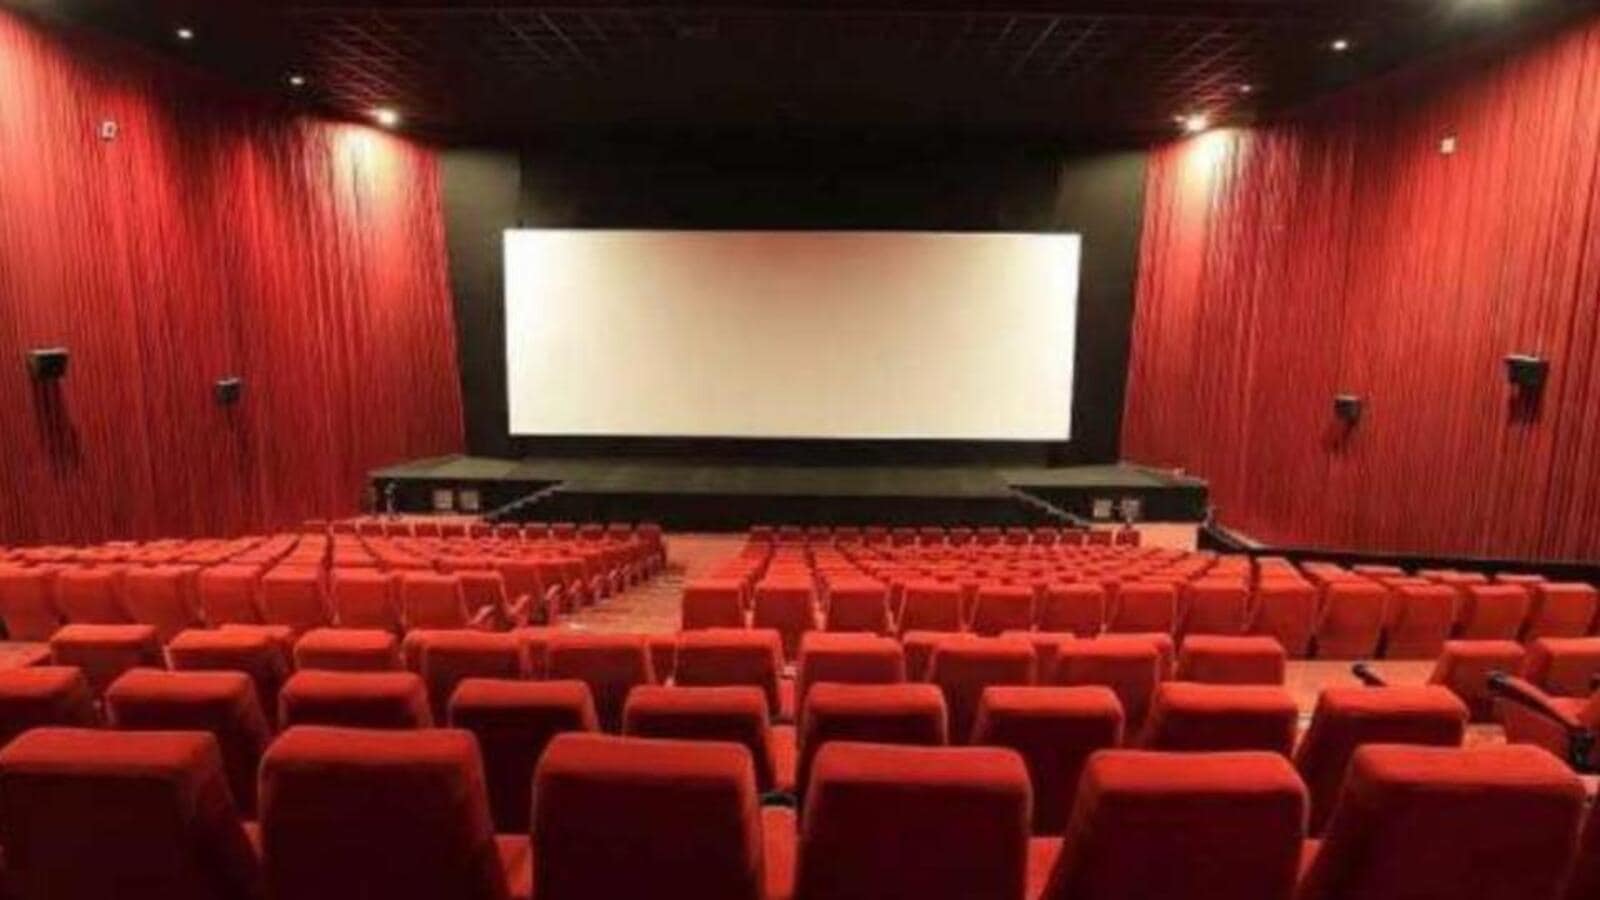 Cinema hall owners can restrict outside food, beverages, rules ...